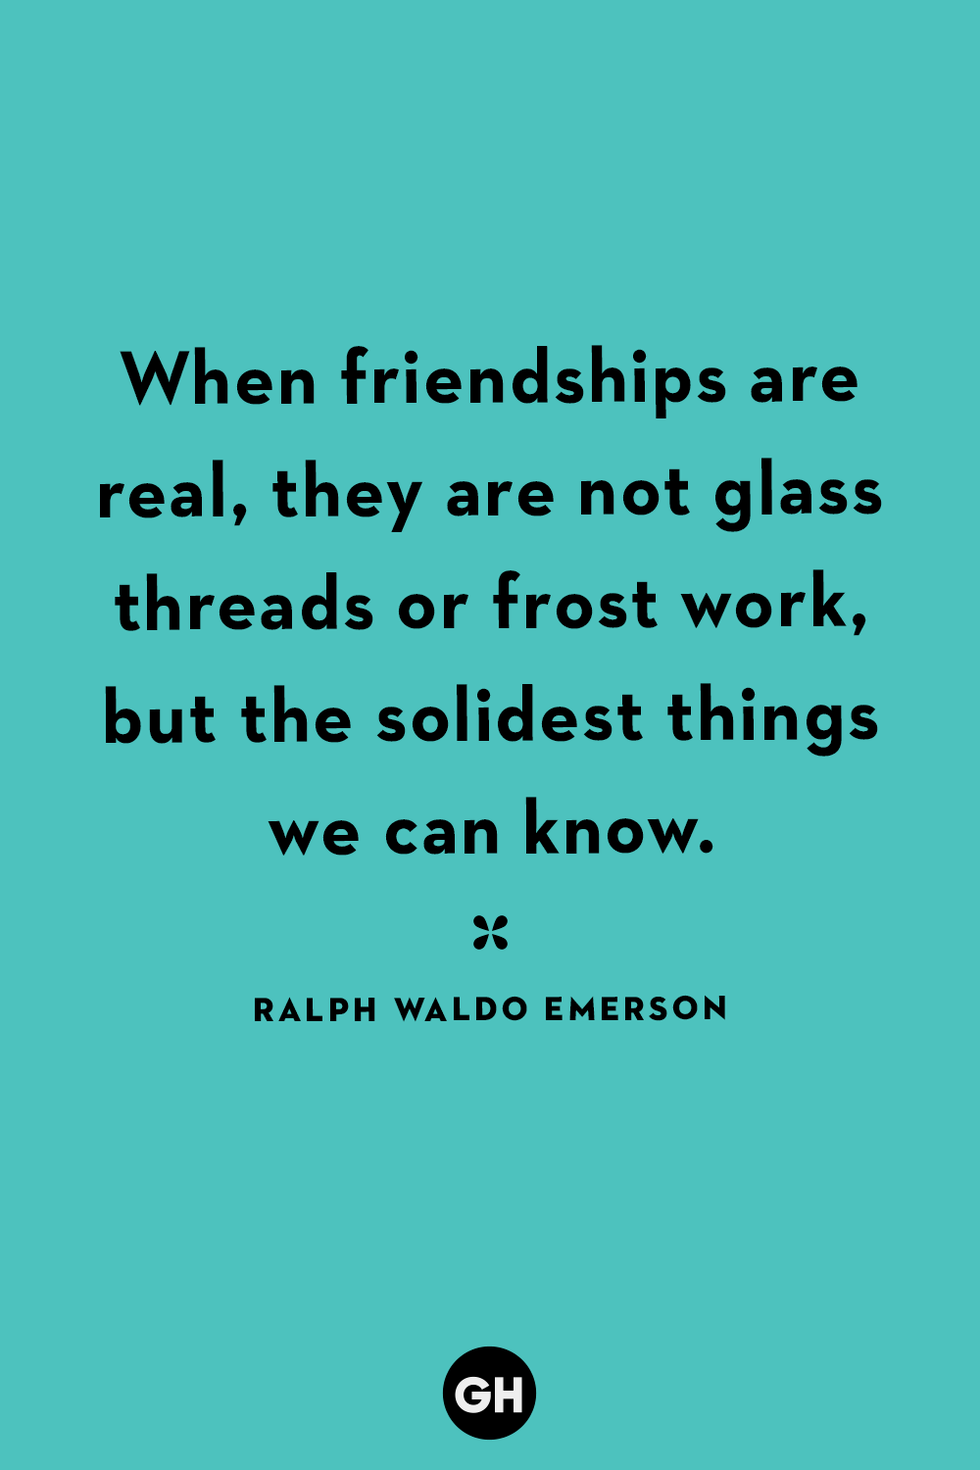 10 Cute Friendship Quotes - Short Sayings About Friendship